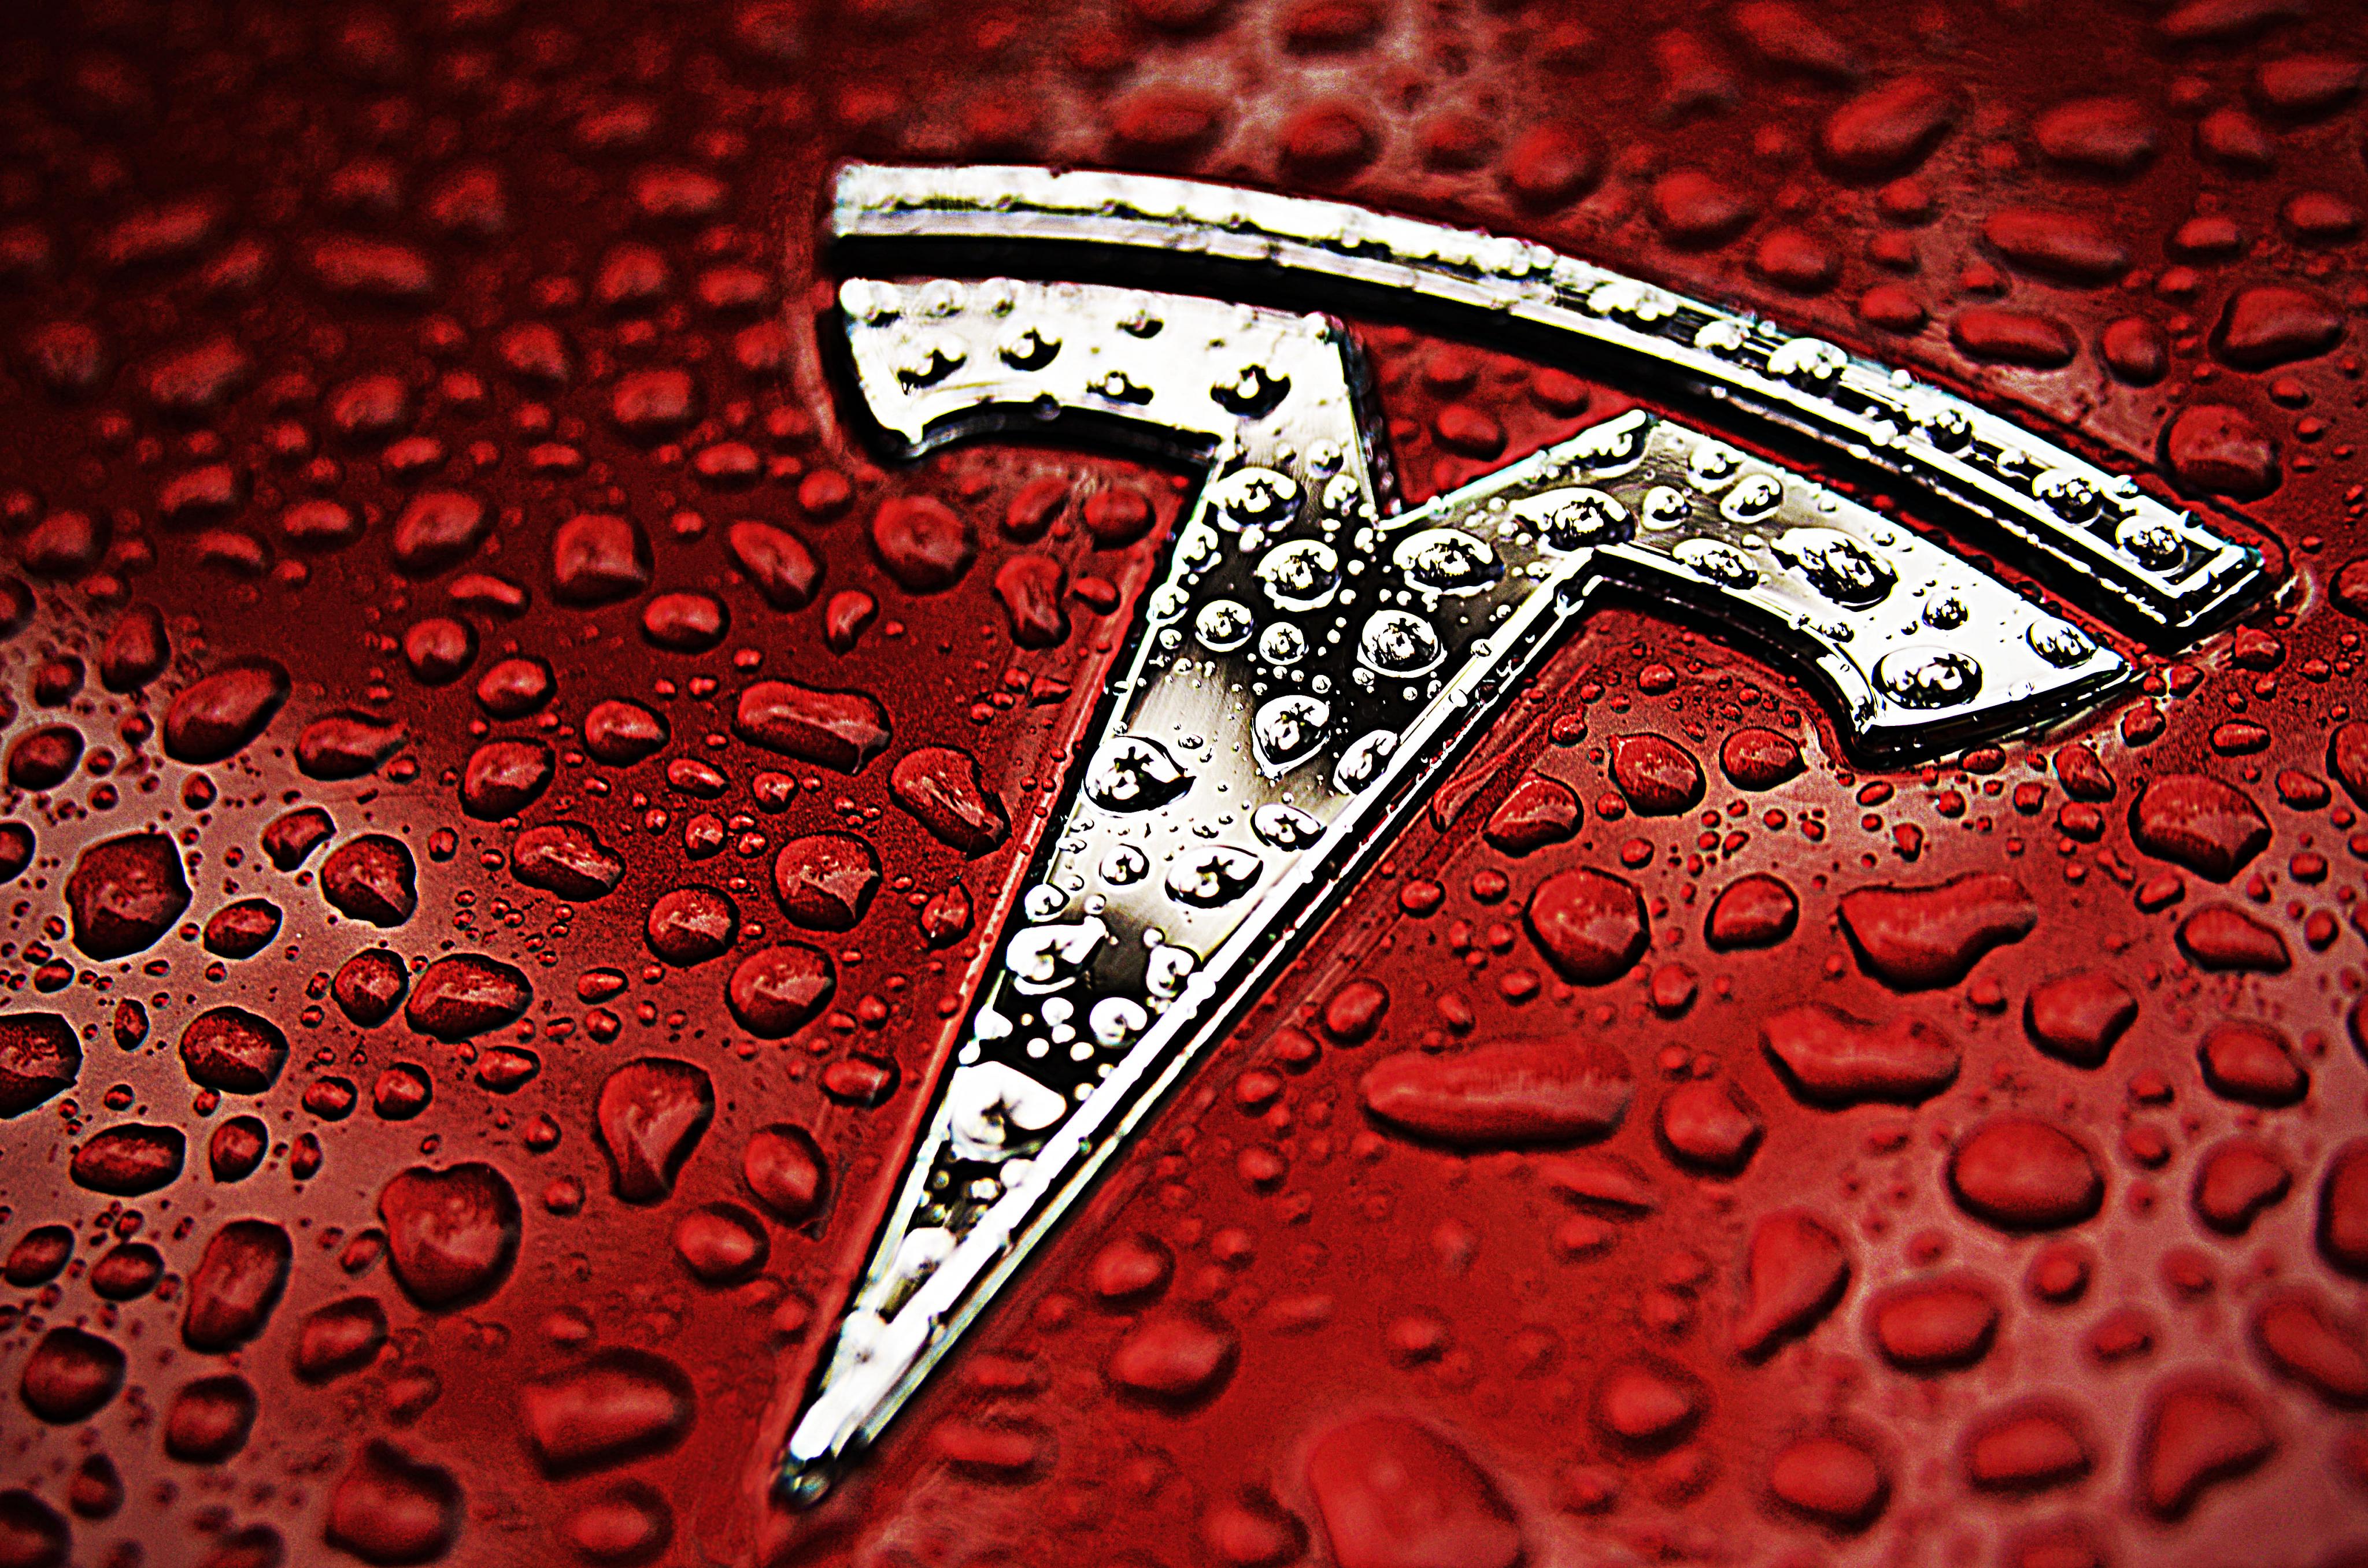 Tesla is synonymous with cars but the end game goes beyond that